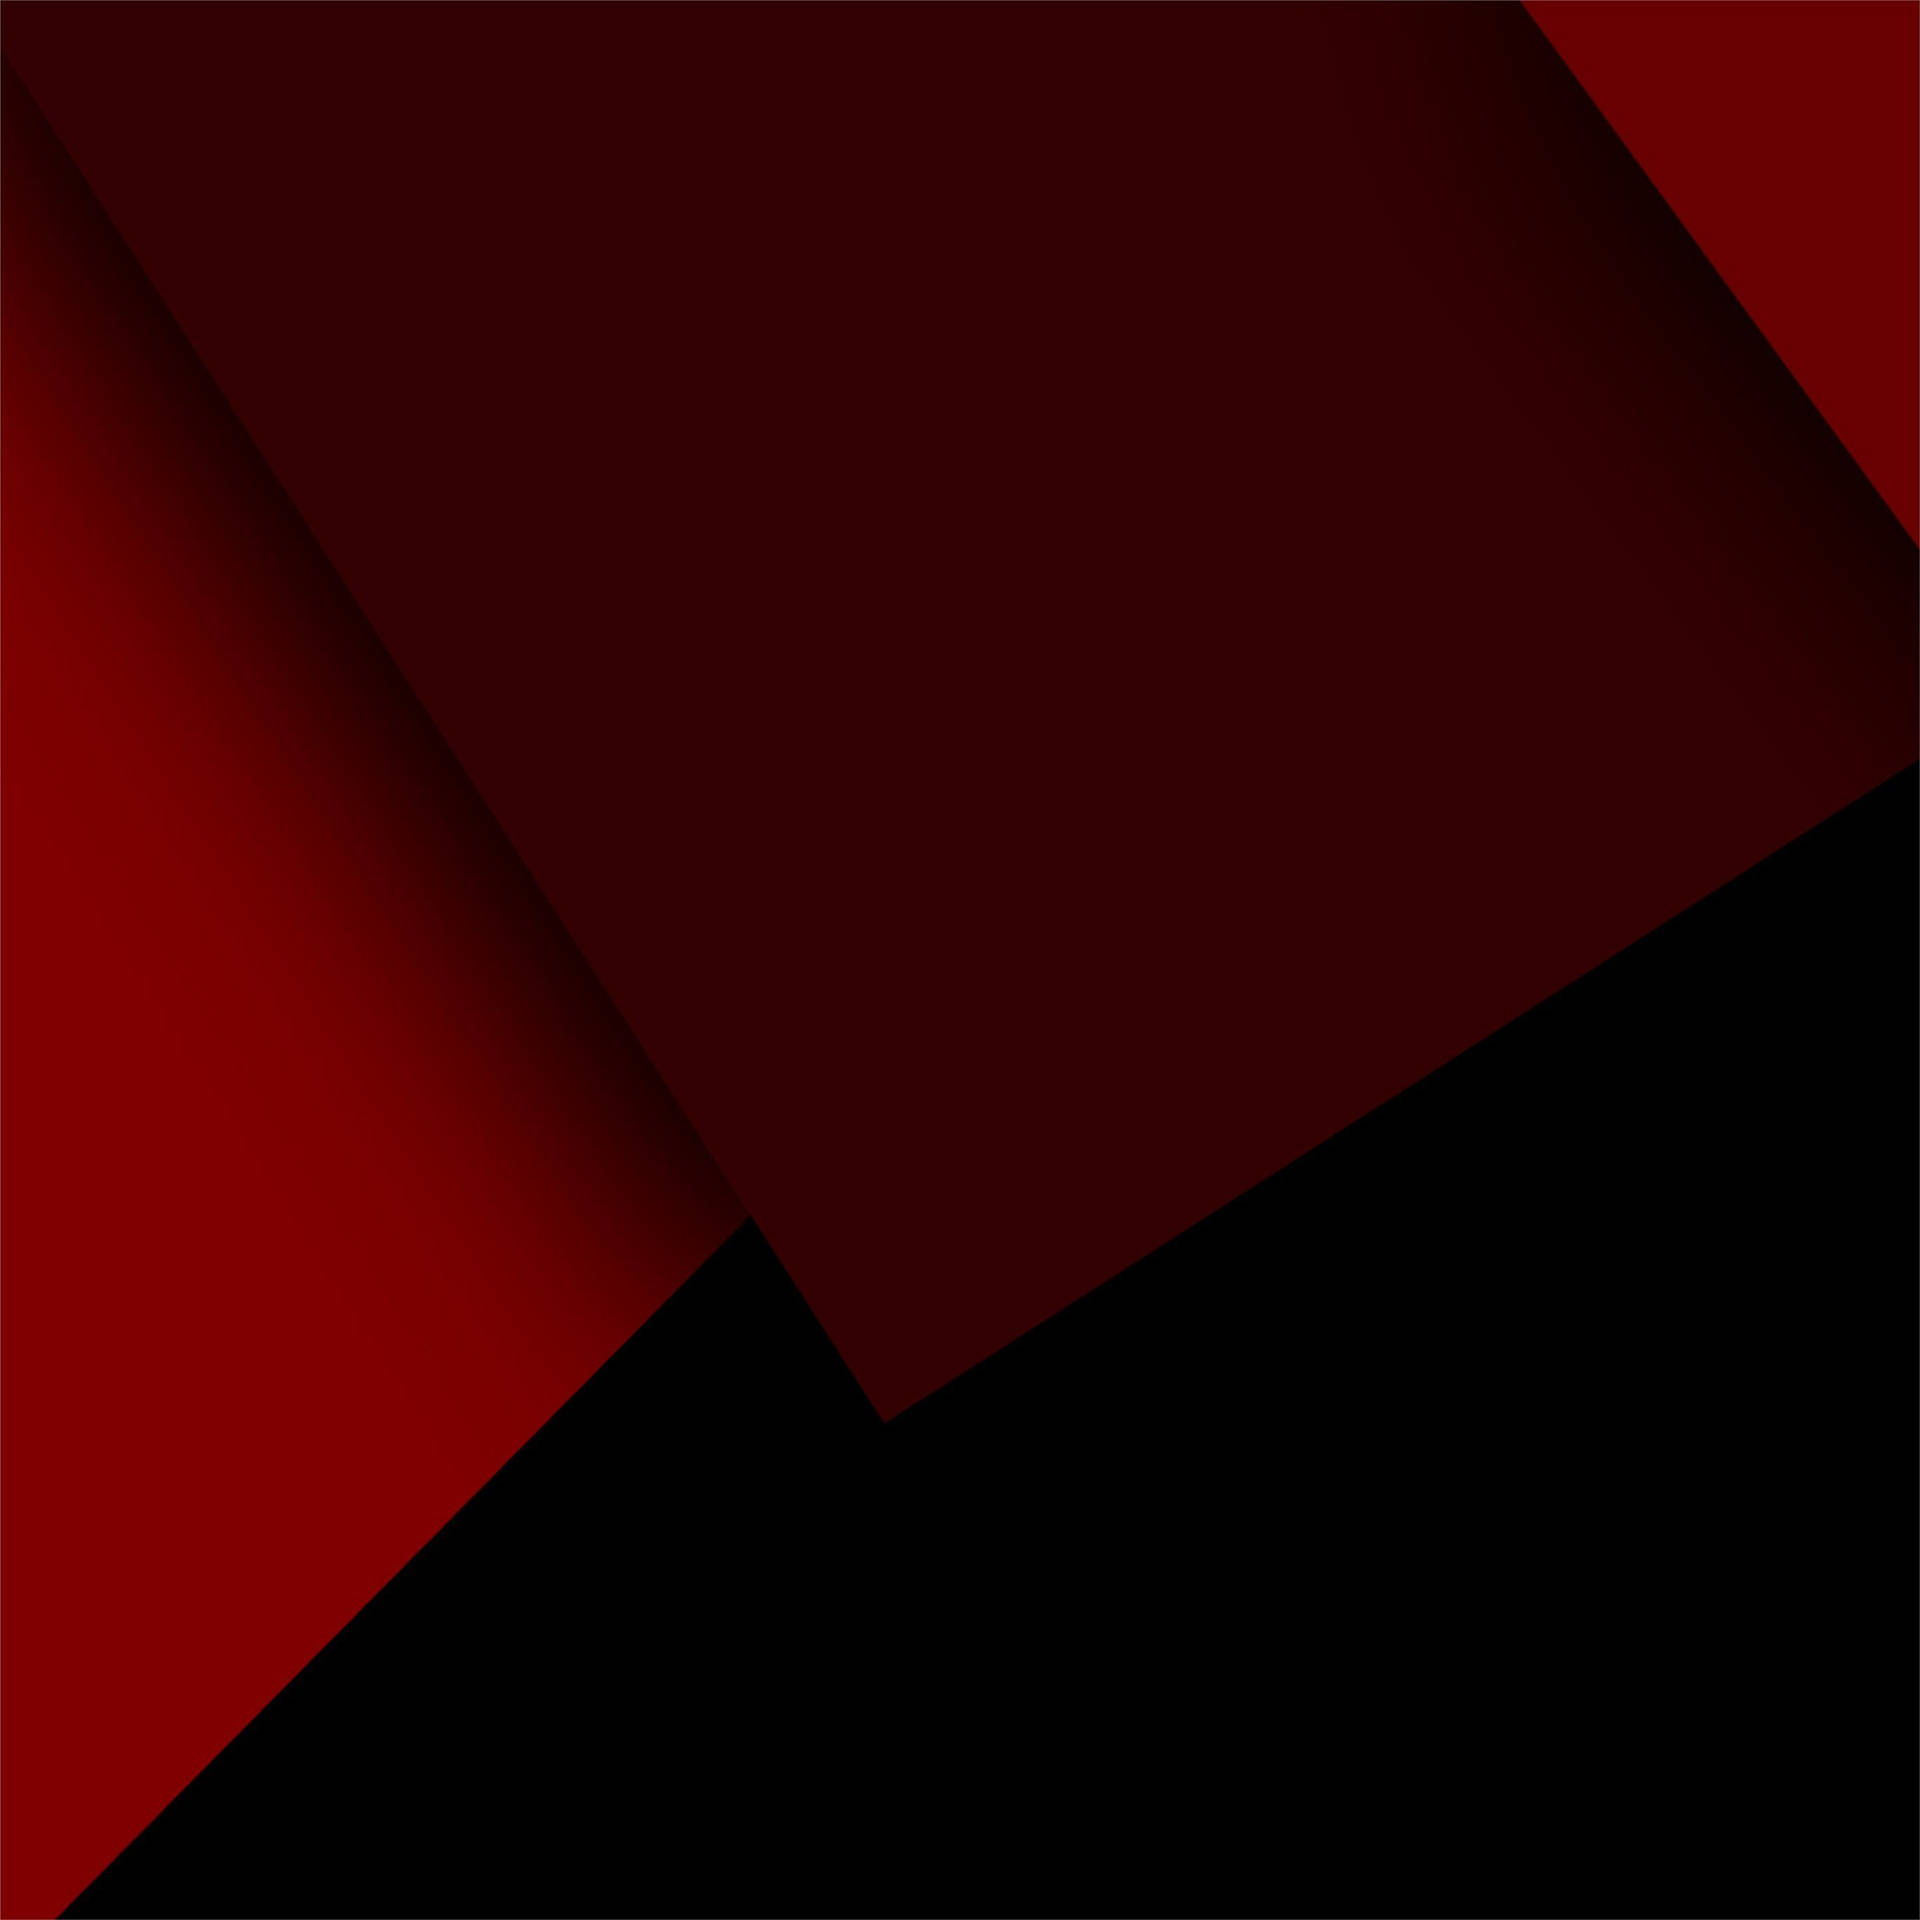 Red Abstract Polygon Art Wallpaper